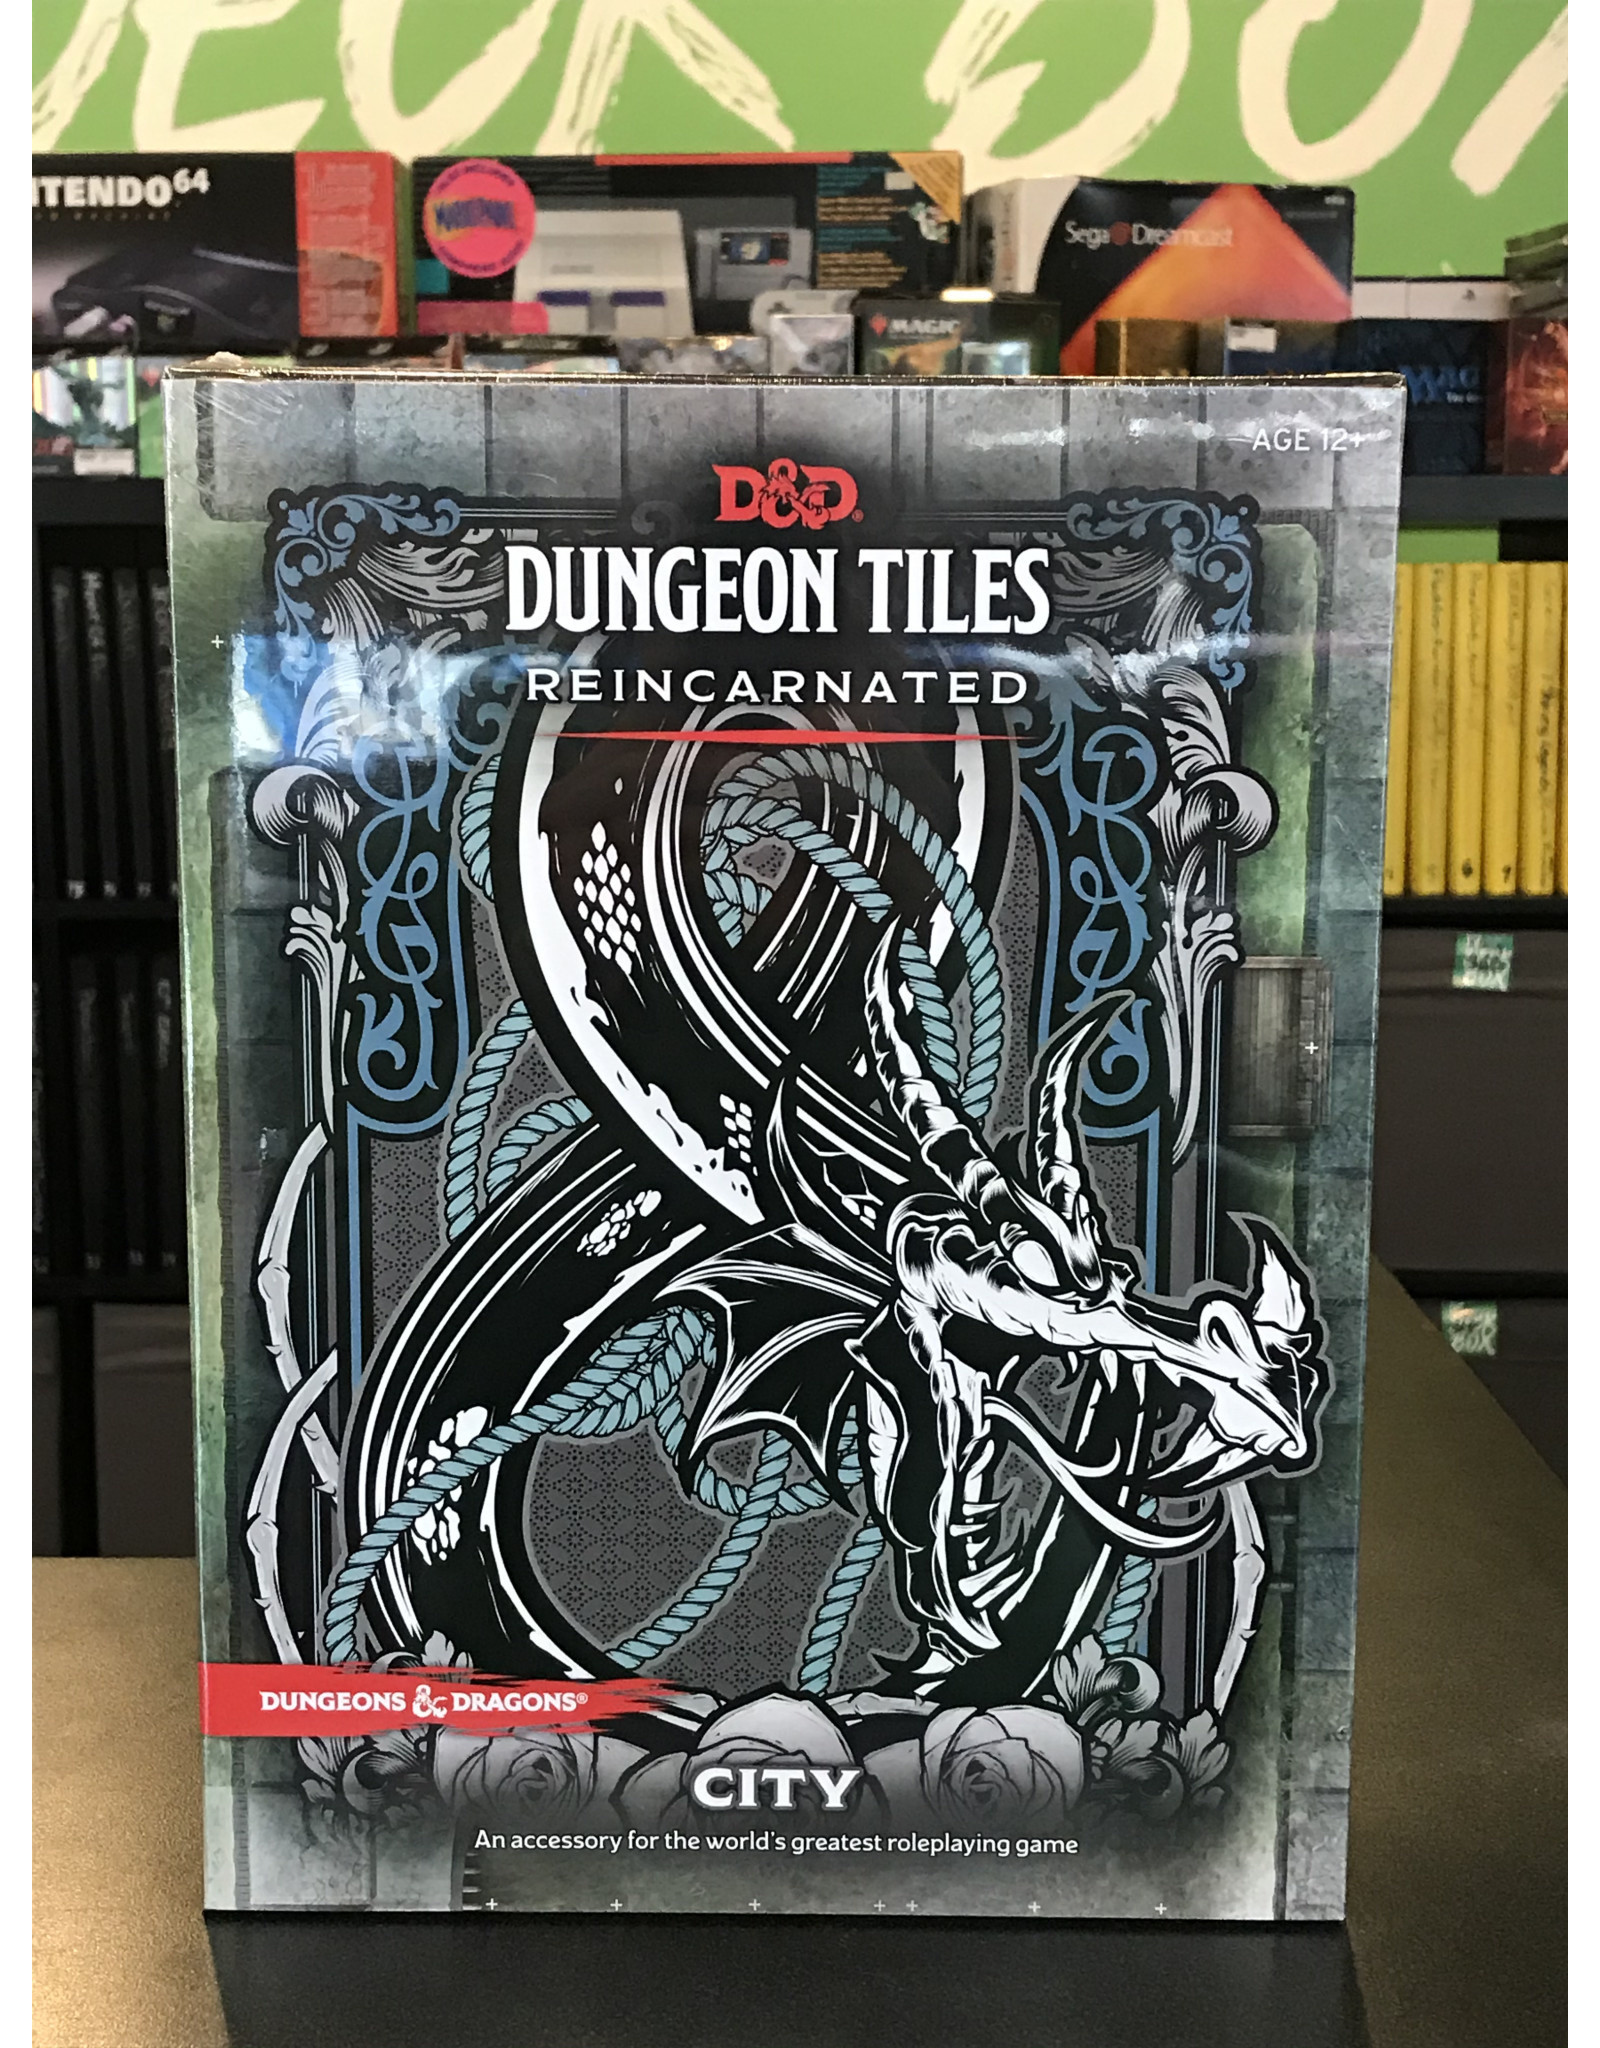 Dungeons & Dragons DND RPG DUNGEON TILES REINCARNATED - CITY (6)